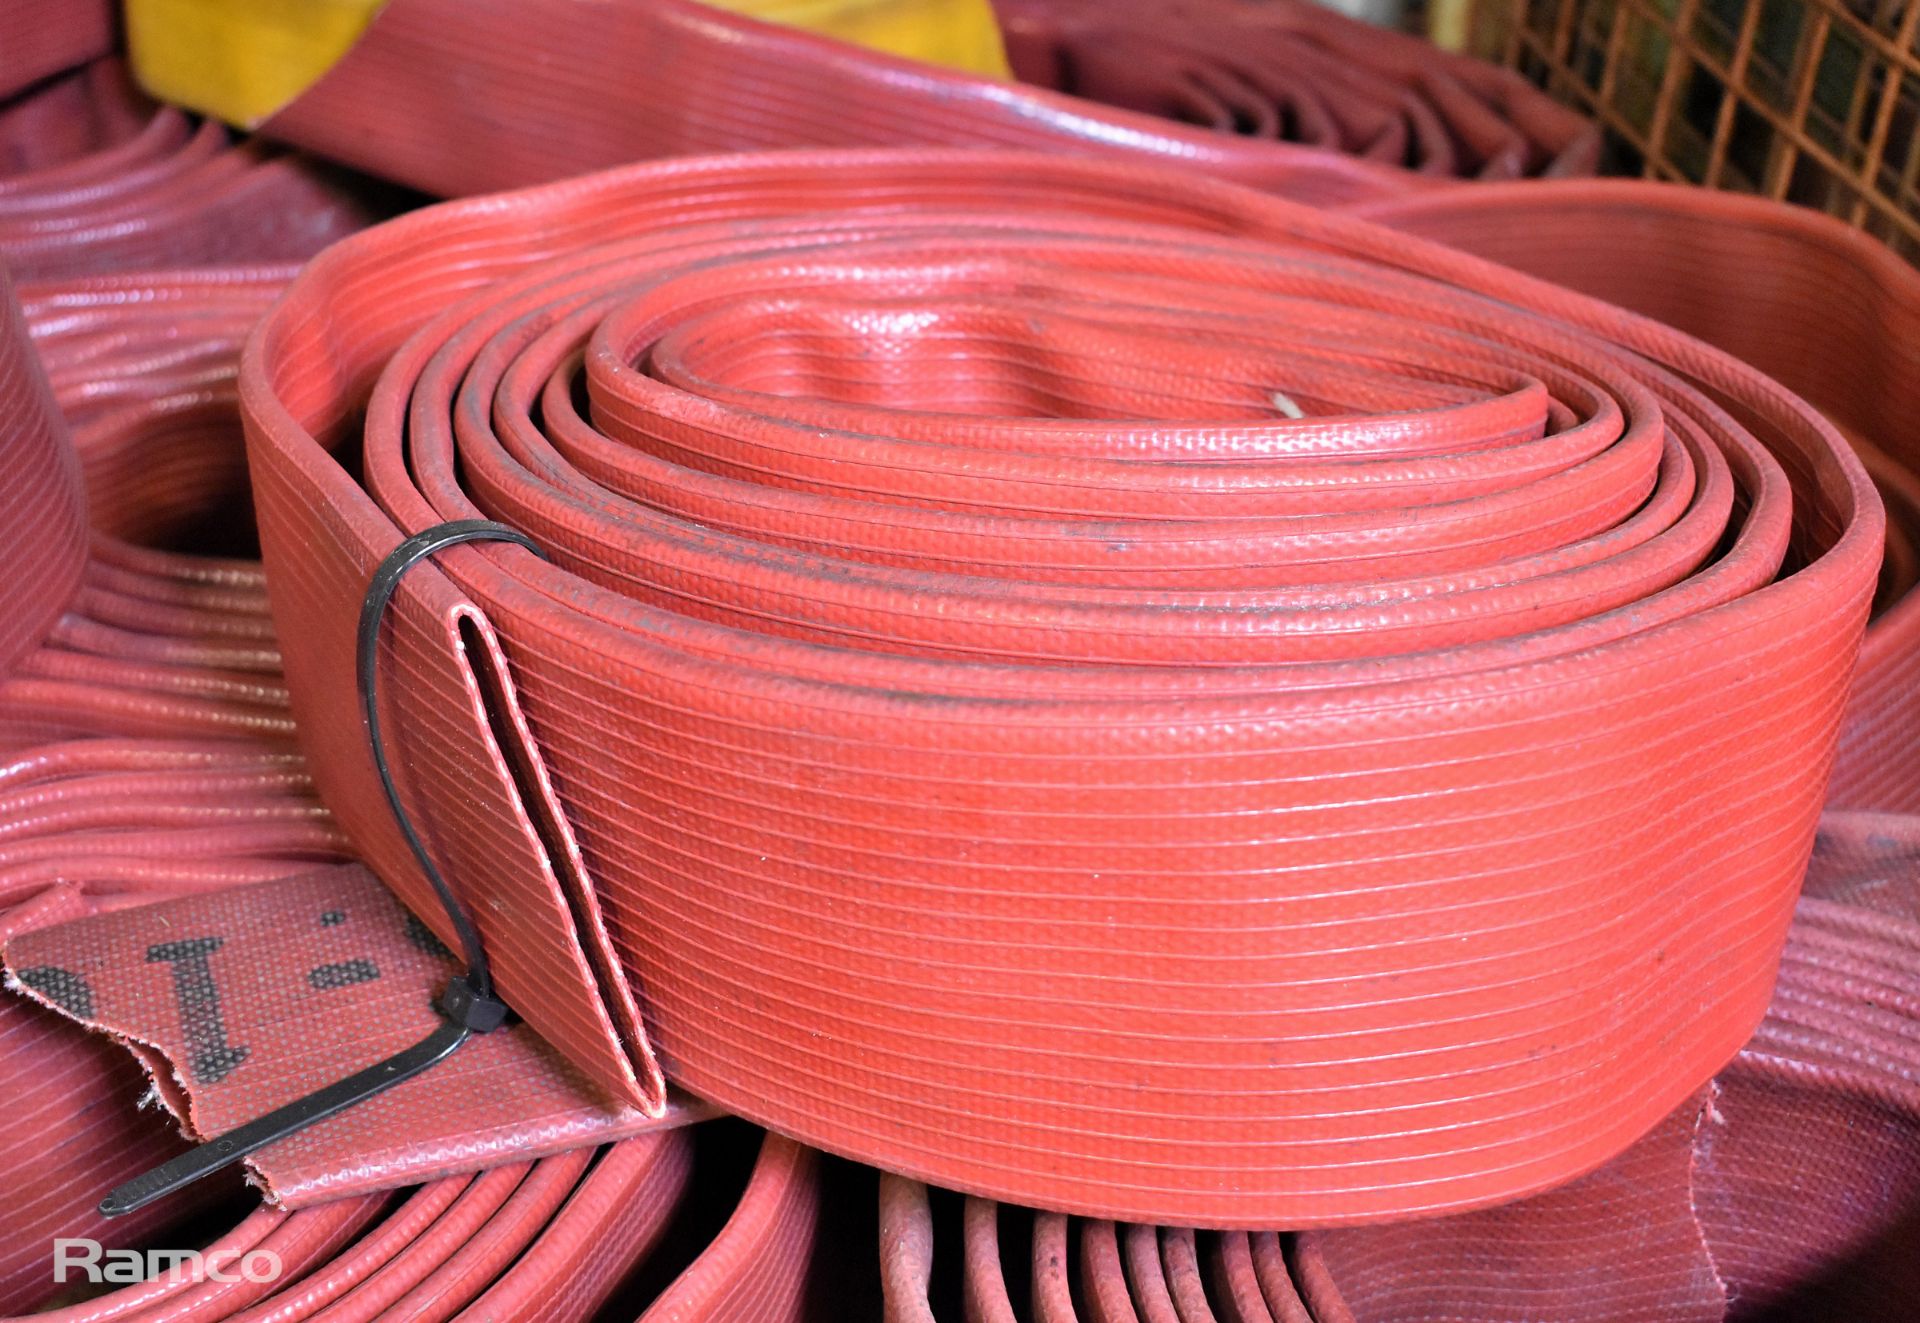 12x red layflat fire hoses - mixed sizes - some missing couplings - Image 2 of 2